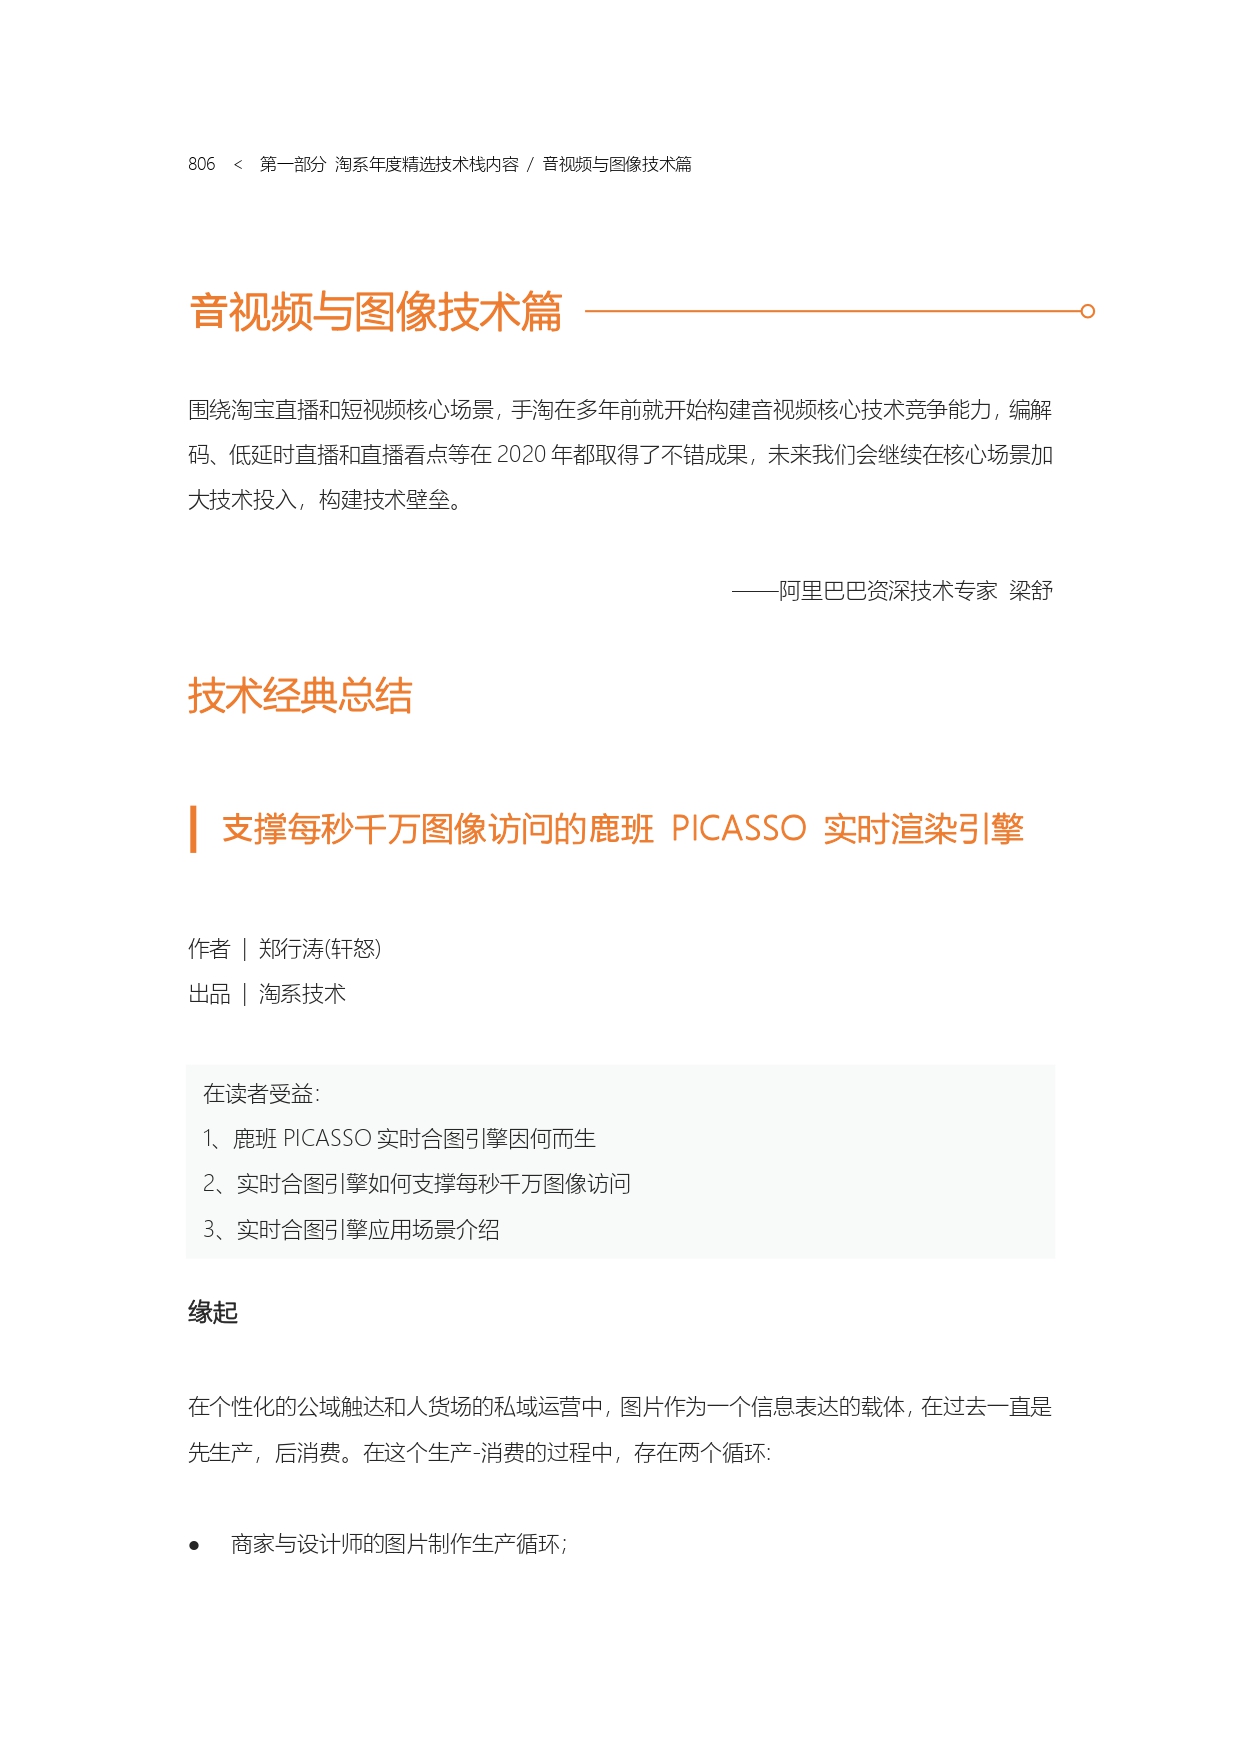 The Complete Works of Tao Technology 2020-571-1189-1-300_page-0236.jpg